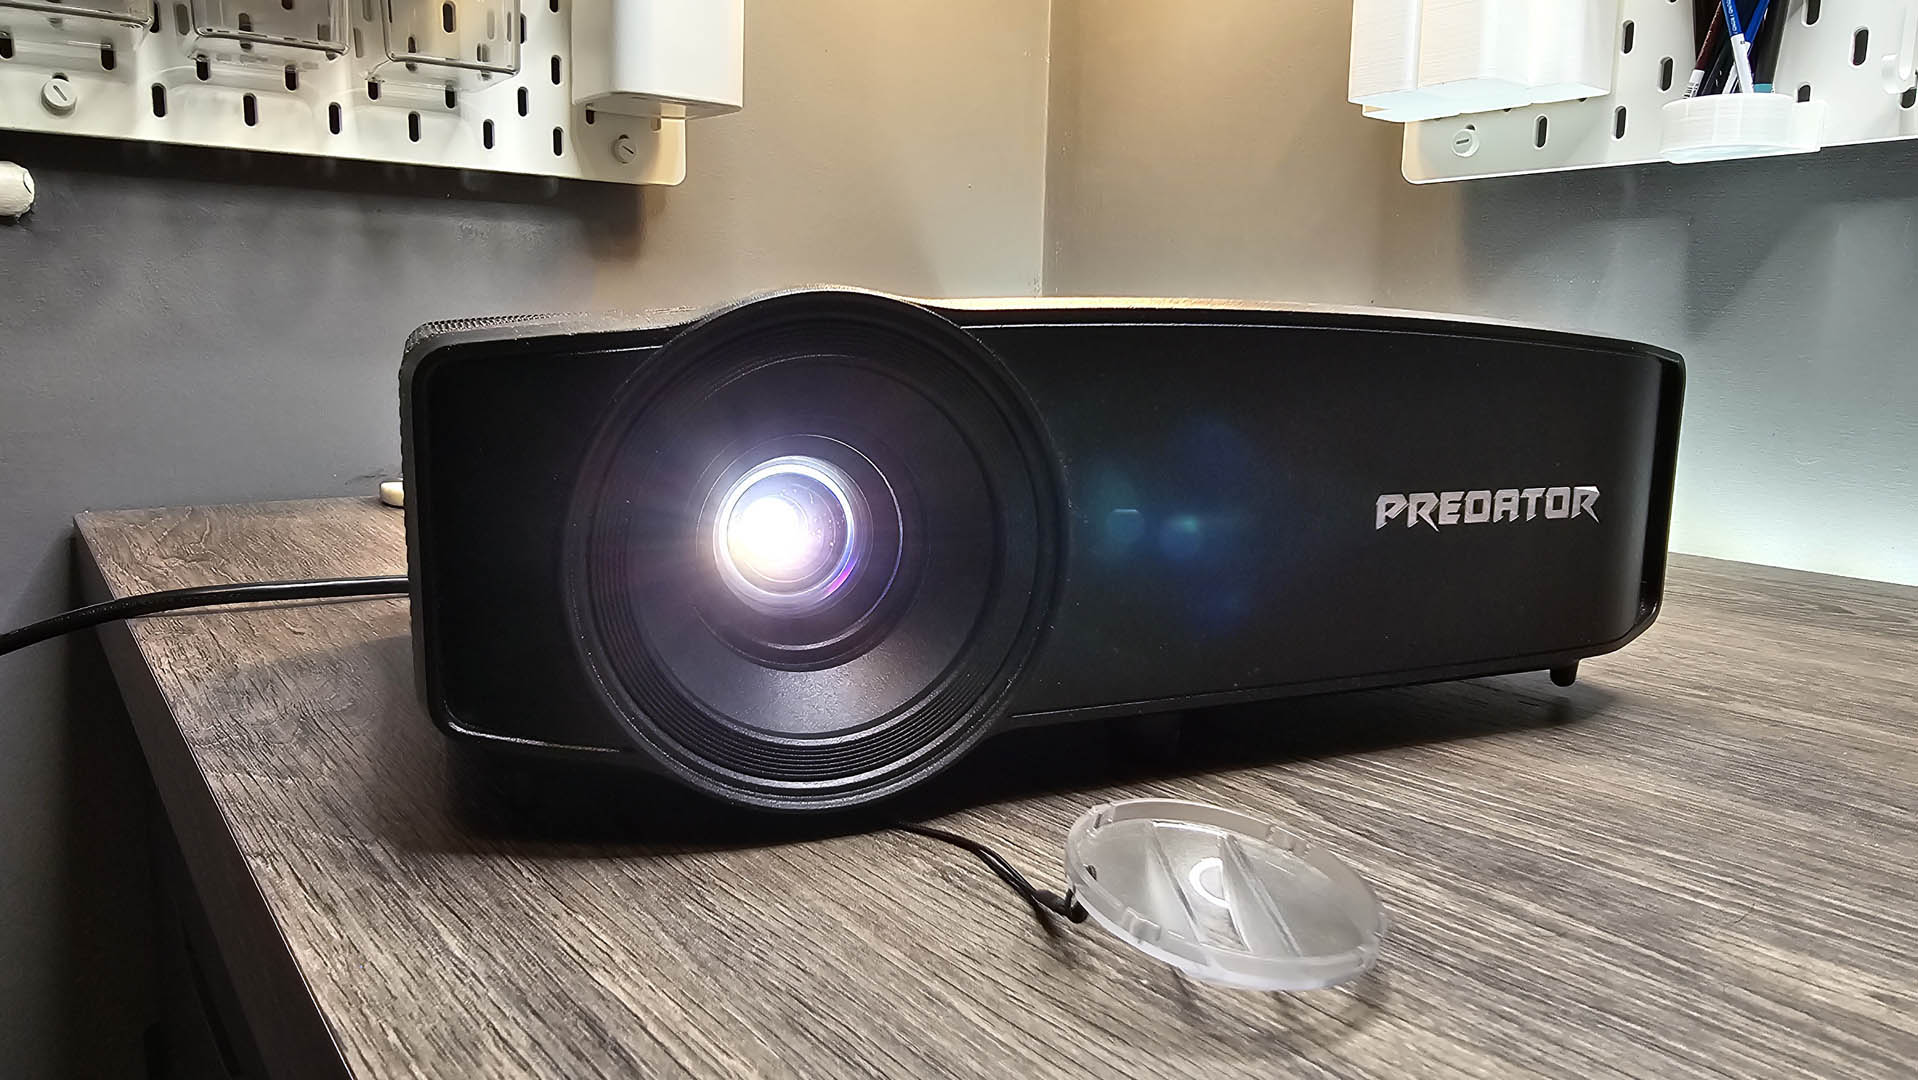 The Acer Predator G711 projector on a table